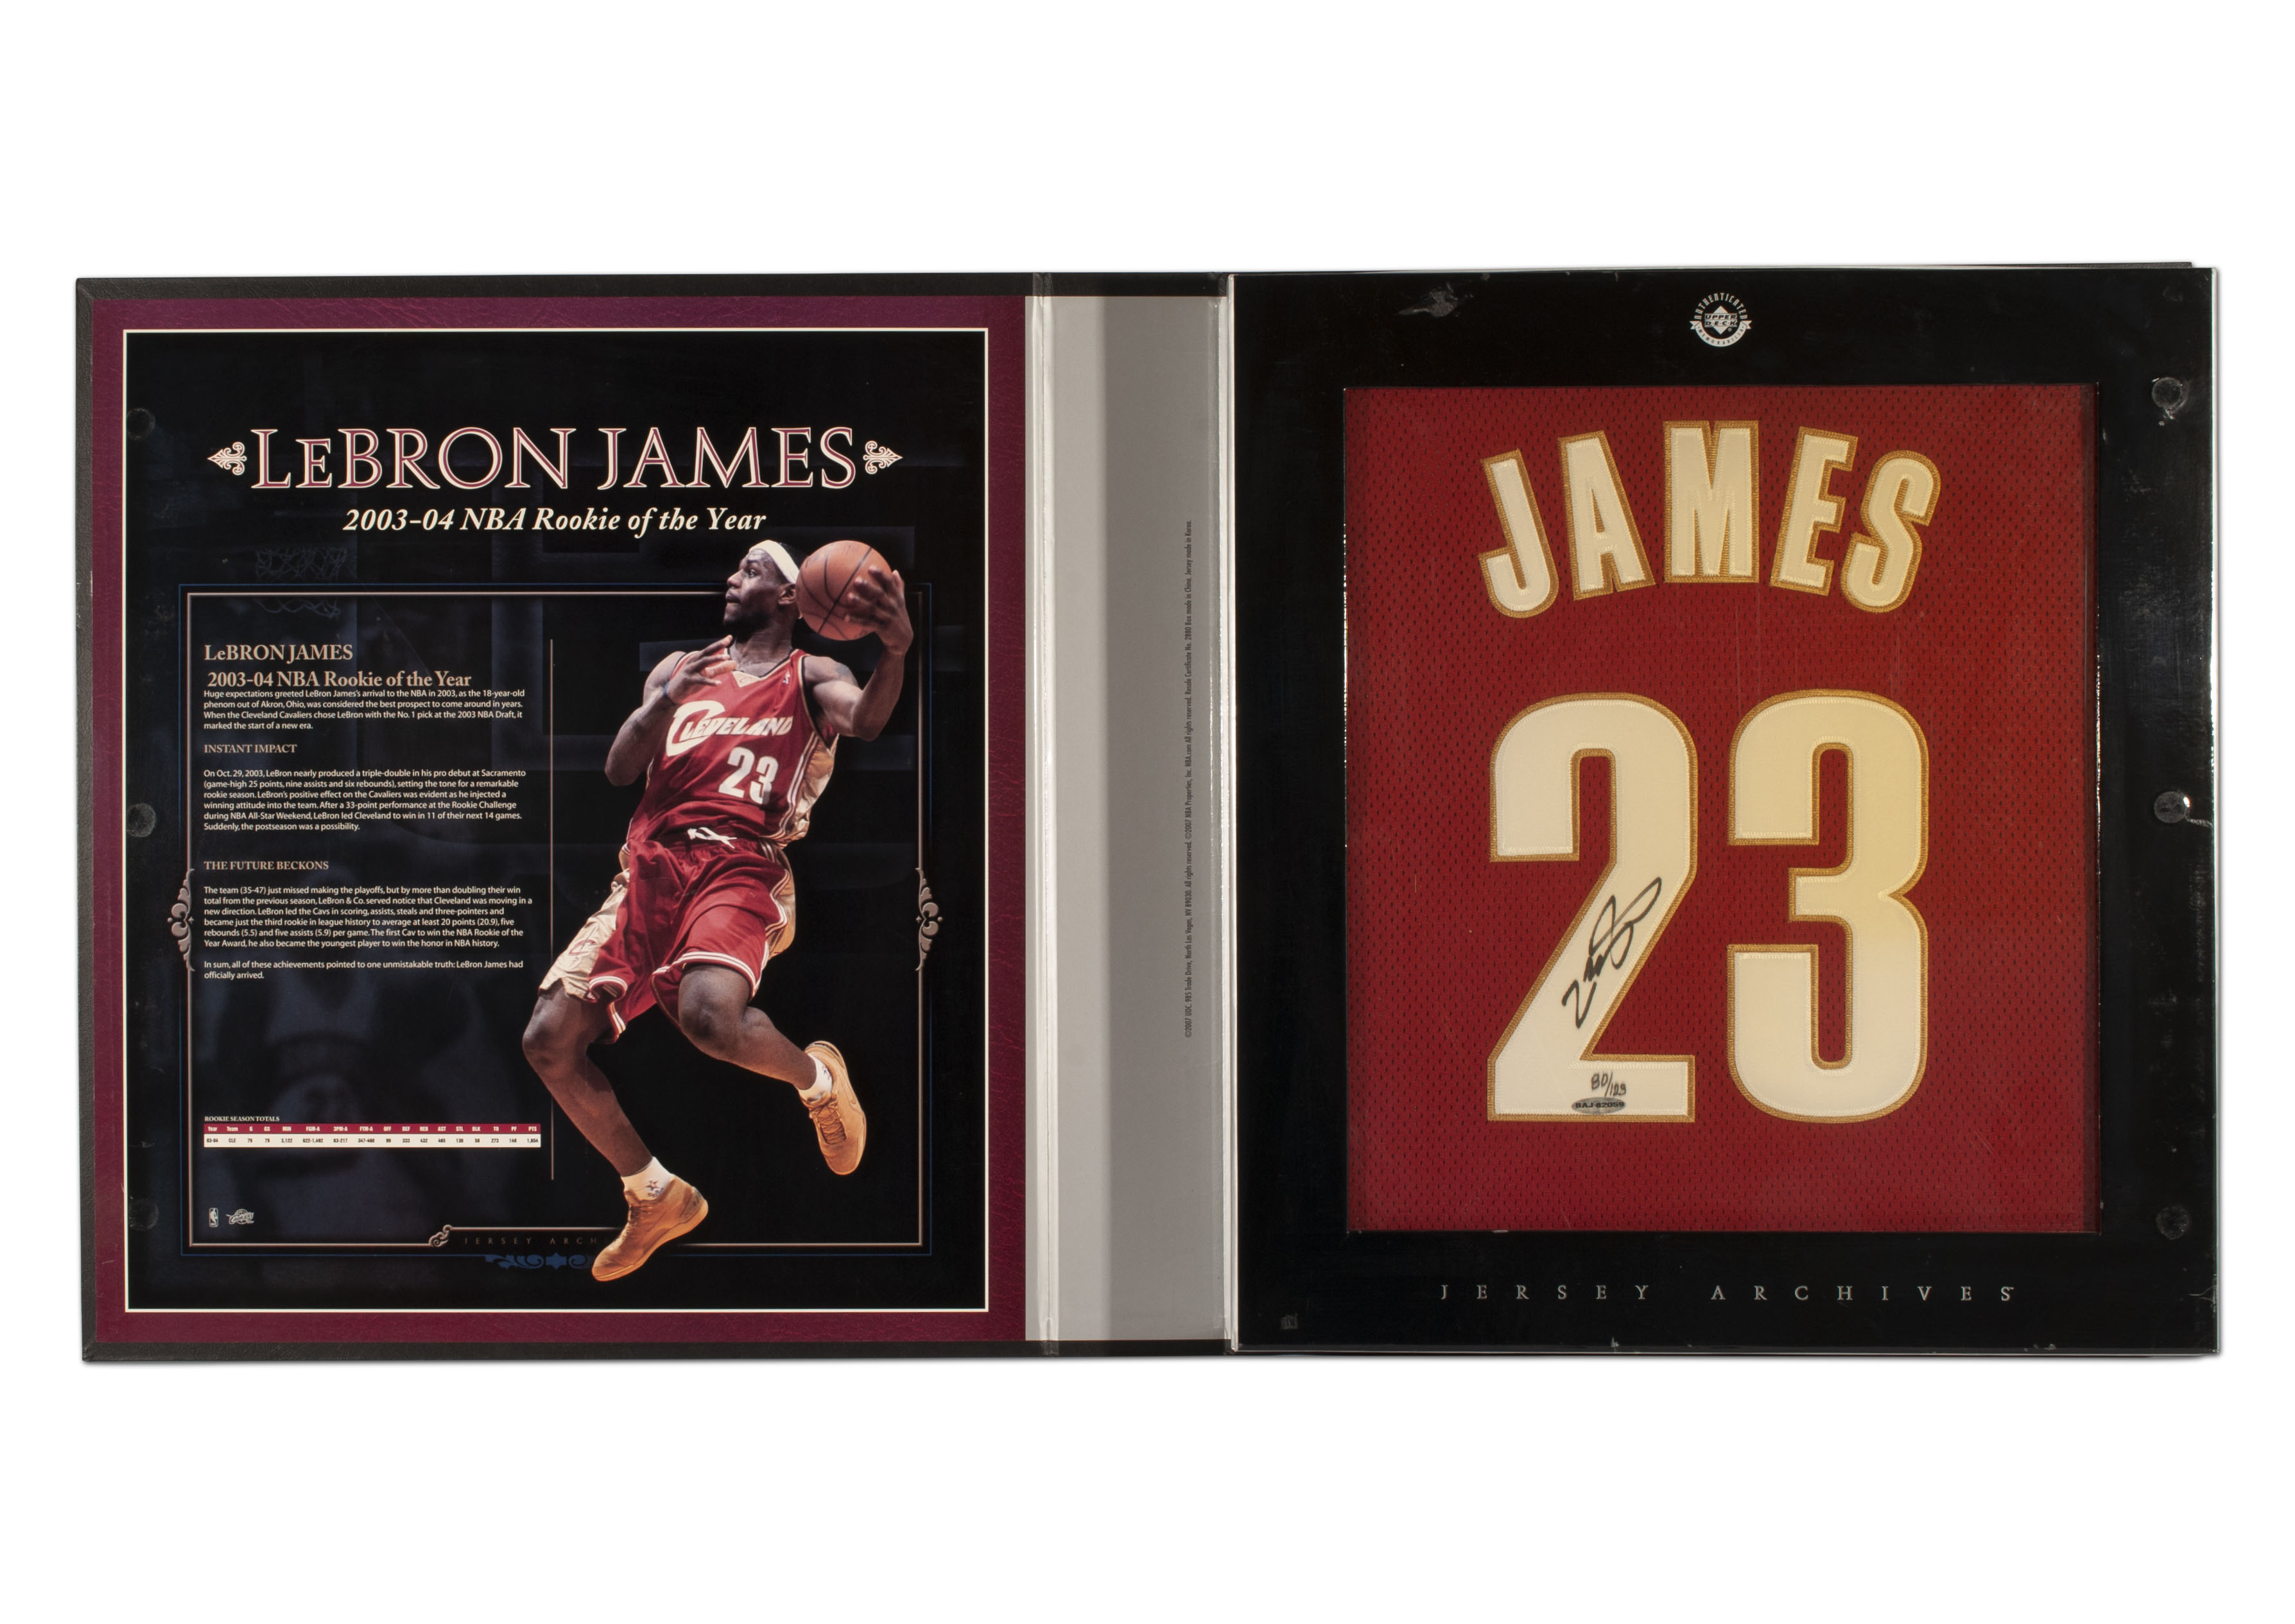 LeBron James 2003-04 AUTOGRAPHED ROOKIE JERSEY FRAMED WITH UPPER DECK COA